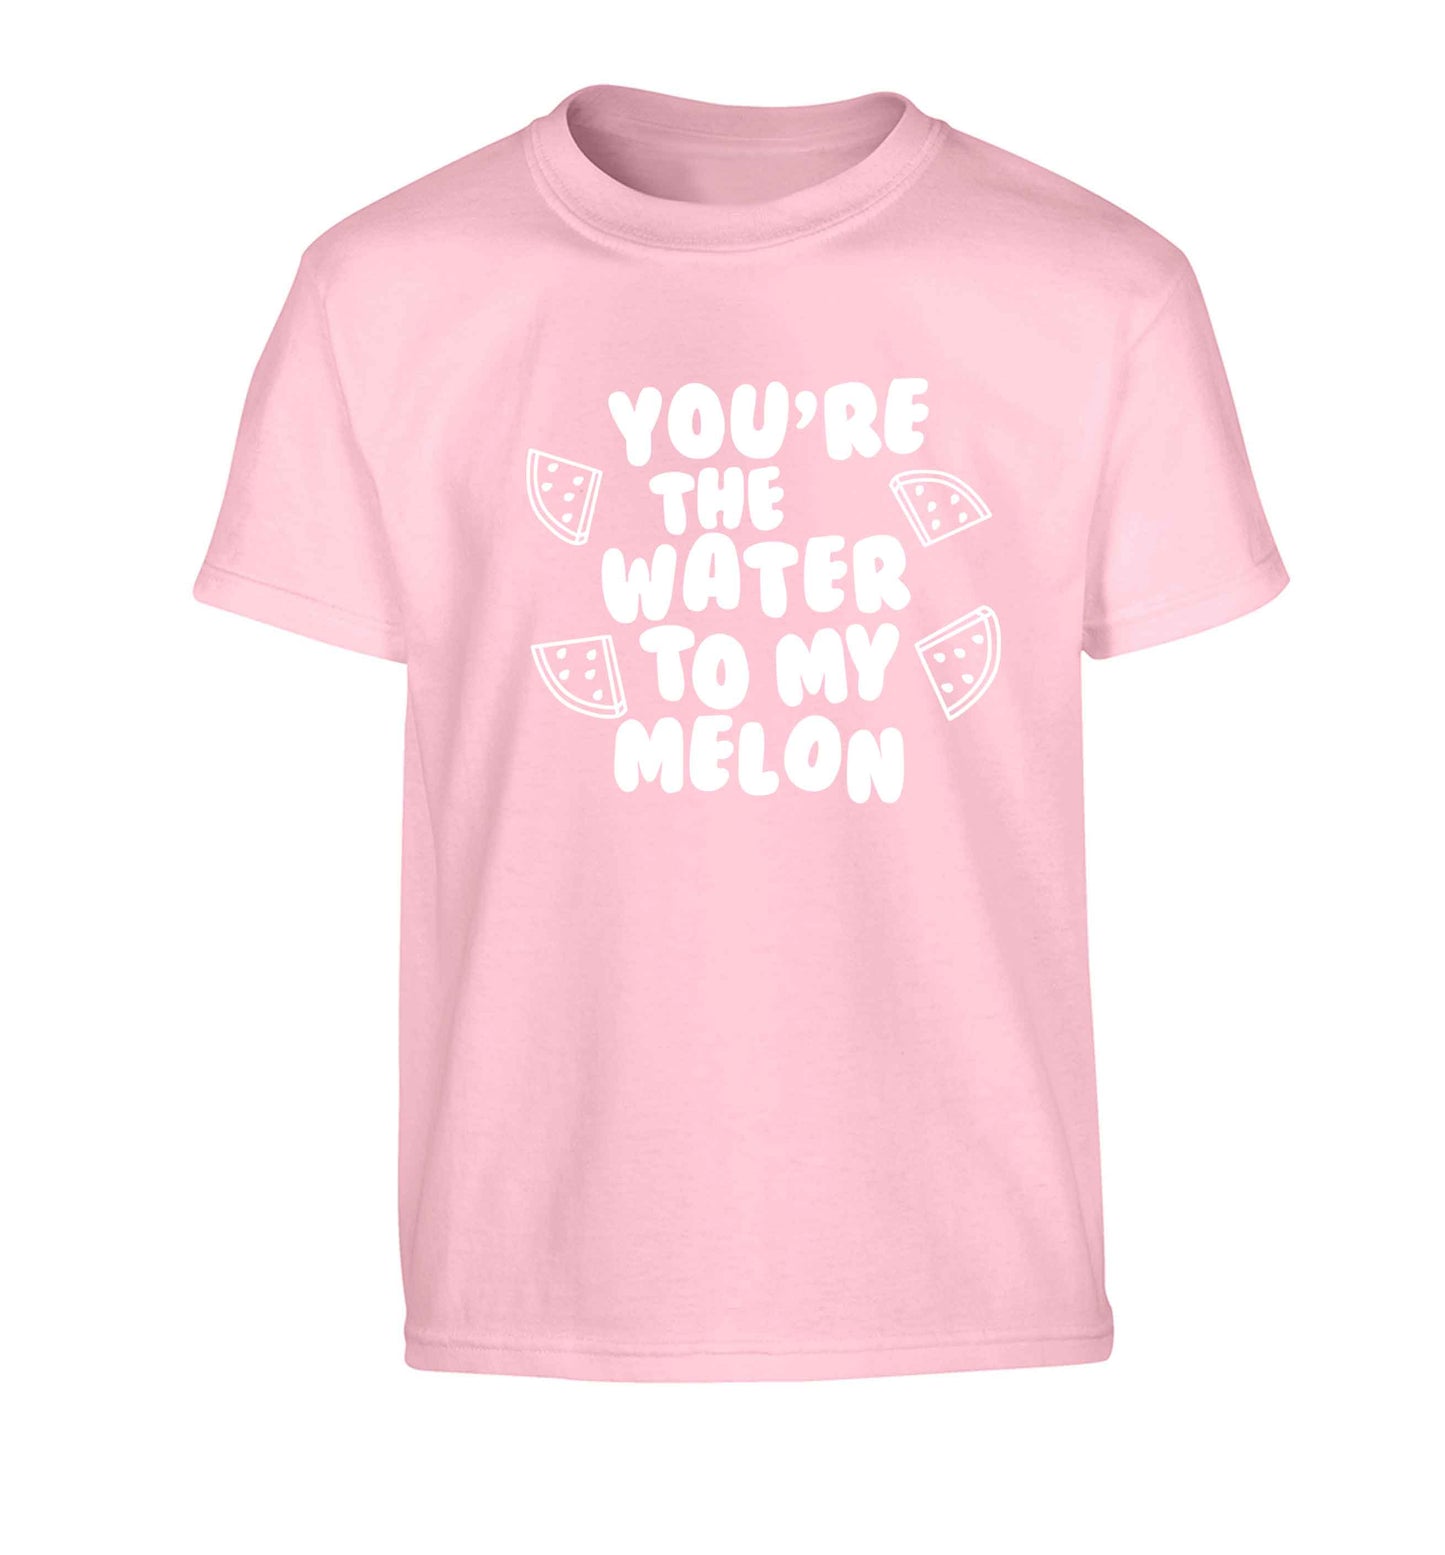 You're the water to my melon Children's light pink Tshirt 12-13 Years